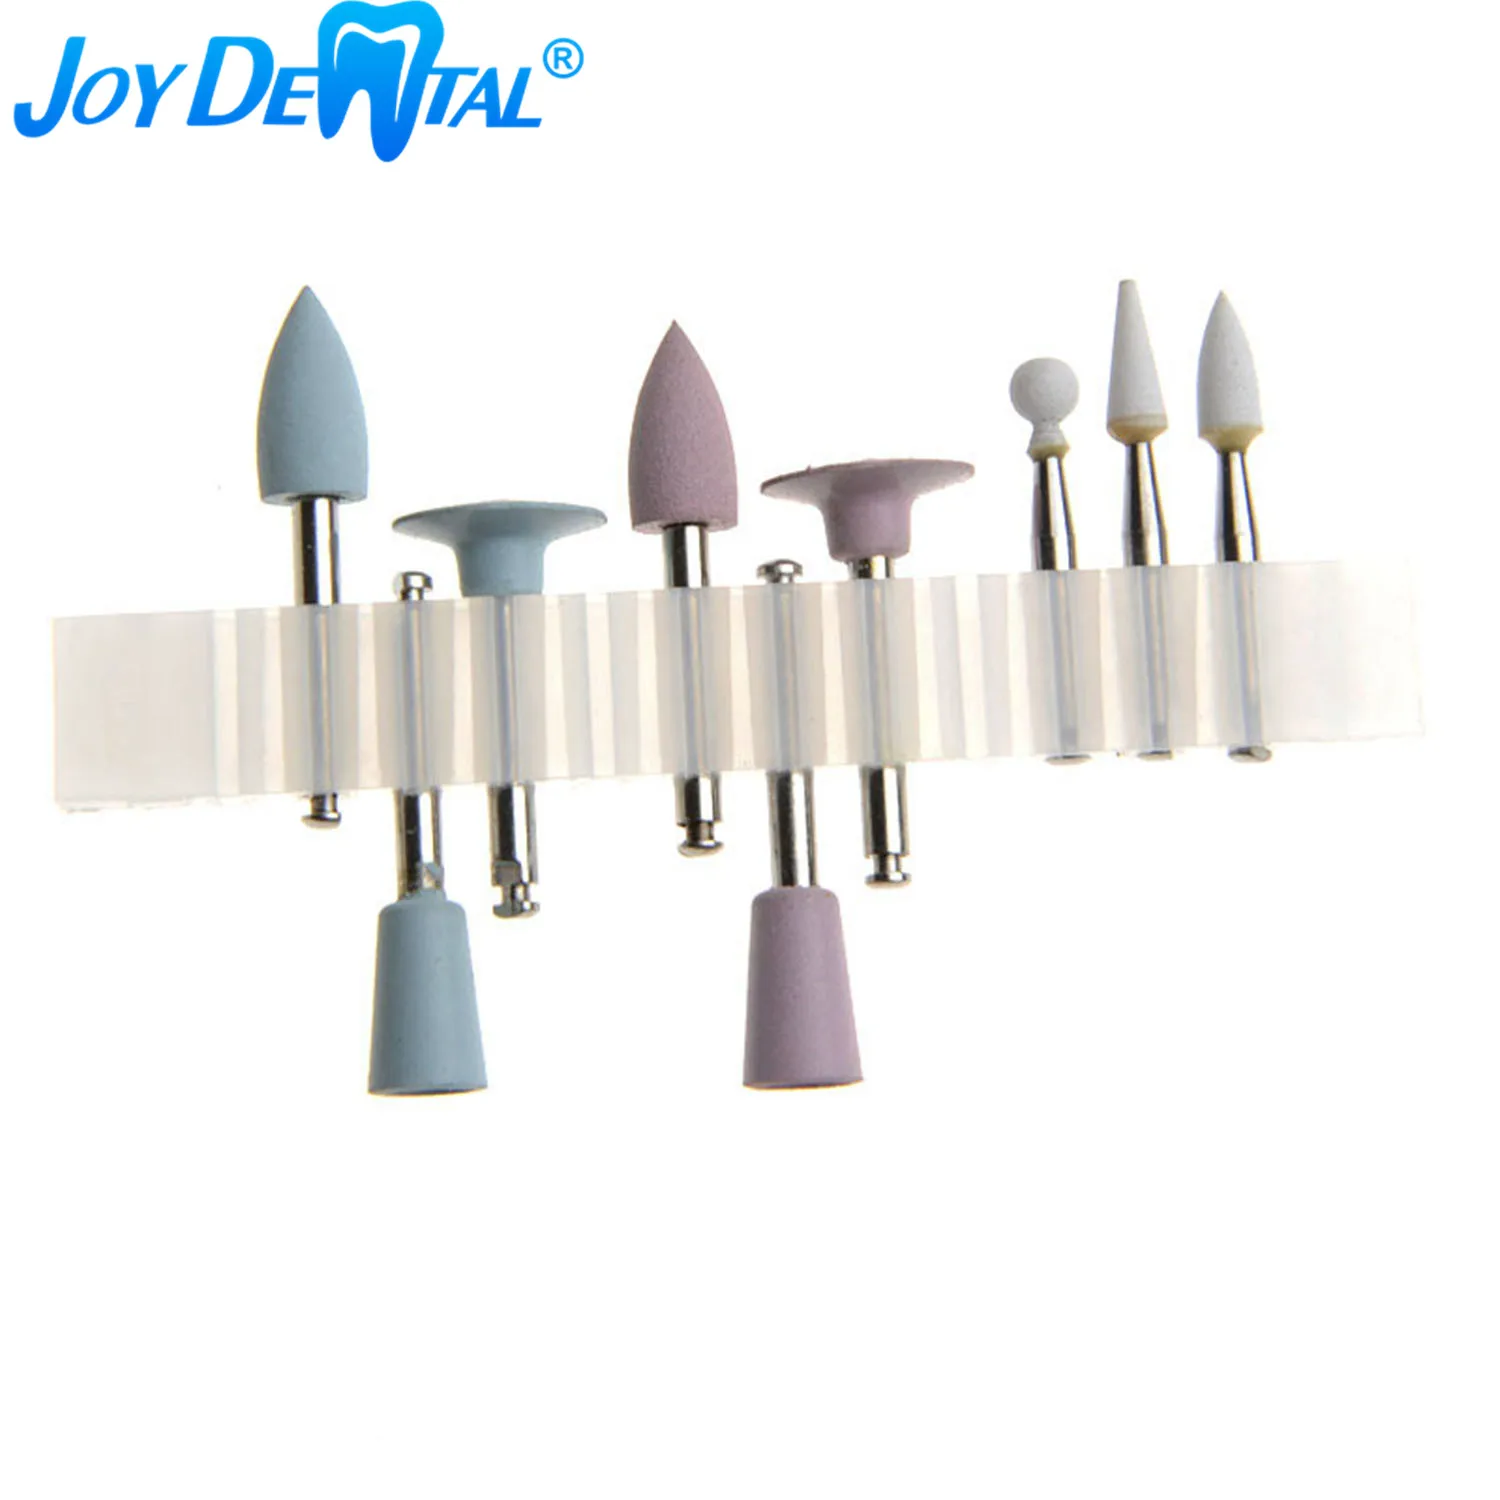 

9 Pcs/Box Dental Composite Polishing kit RA 0309 3 Ceramic and 6 Silicone Rubber Polishers For Low Speed Handpiece Contra Angle